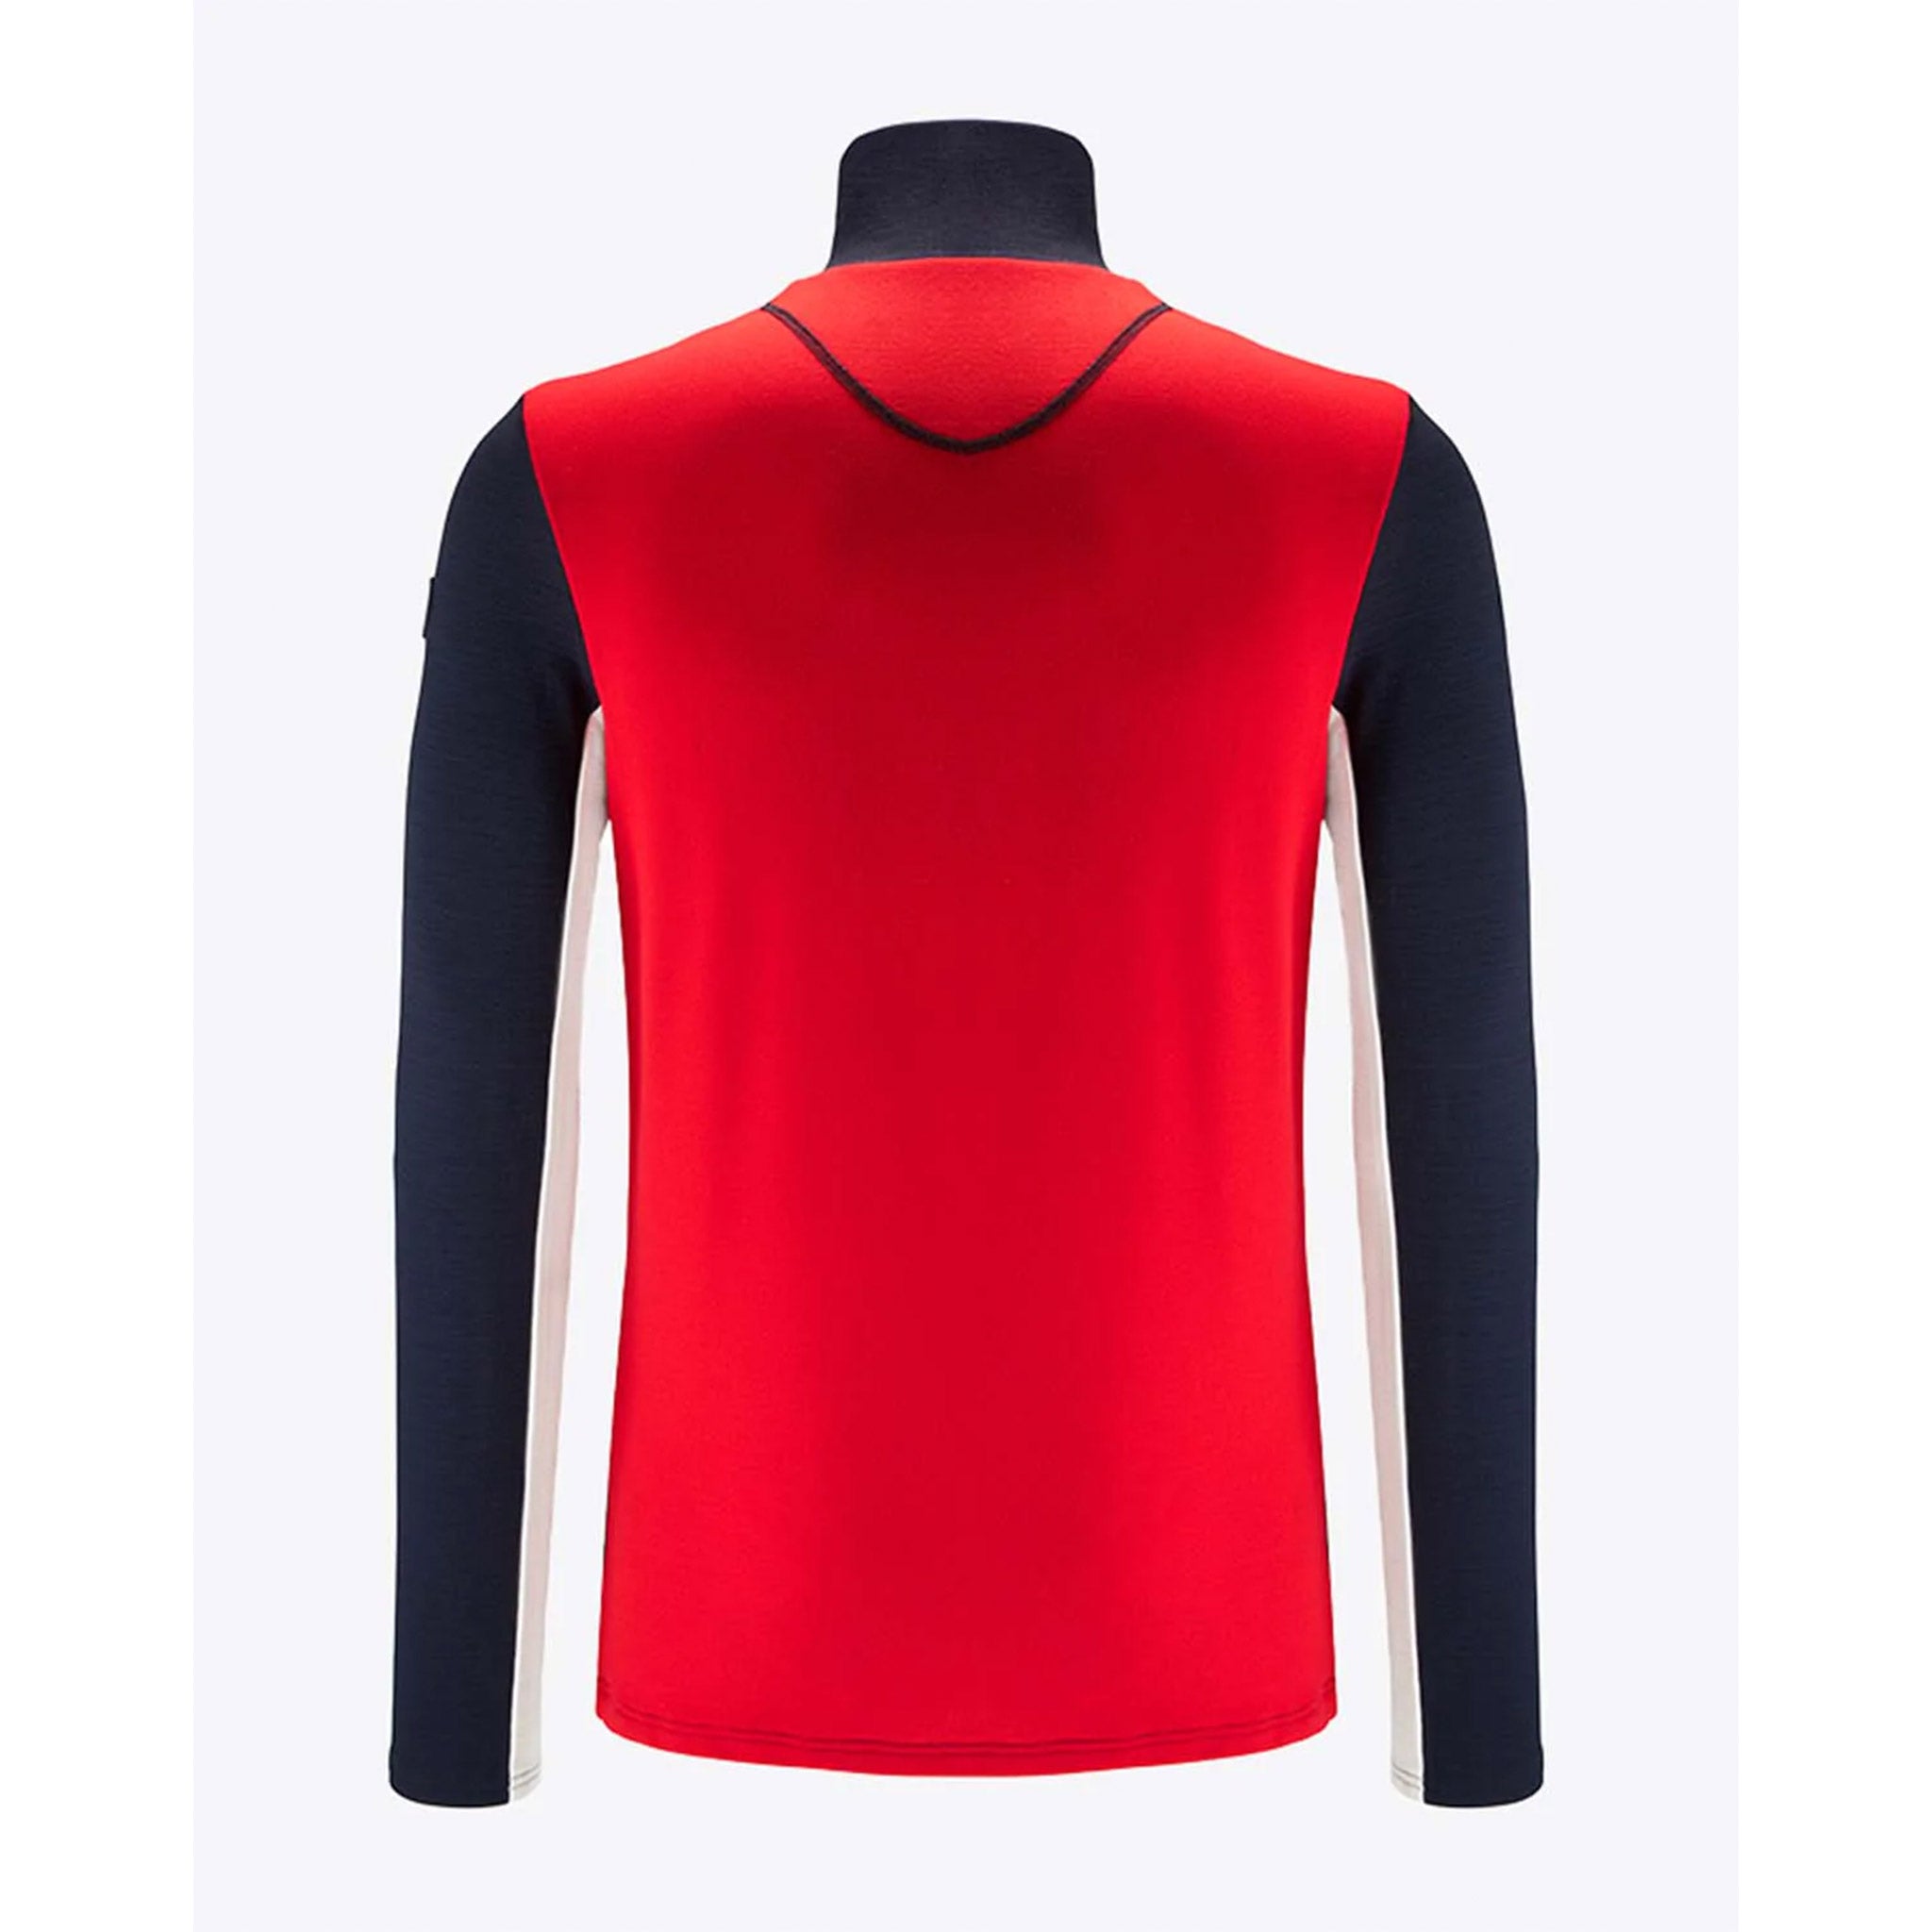 Tryvann Sweater in Navy/Red